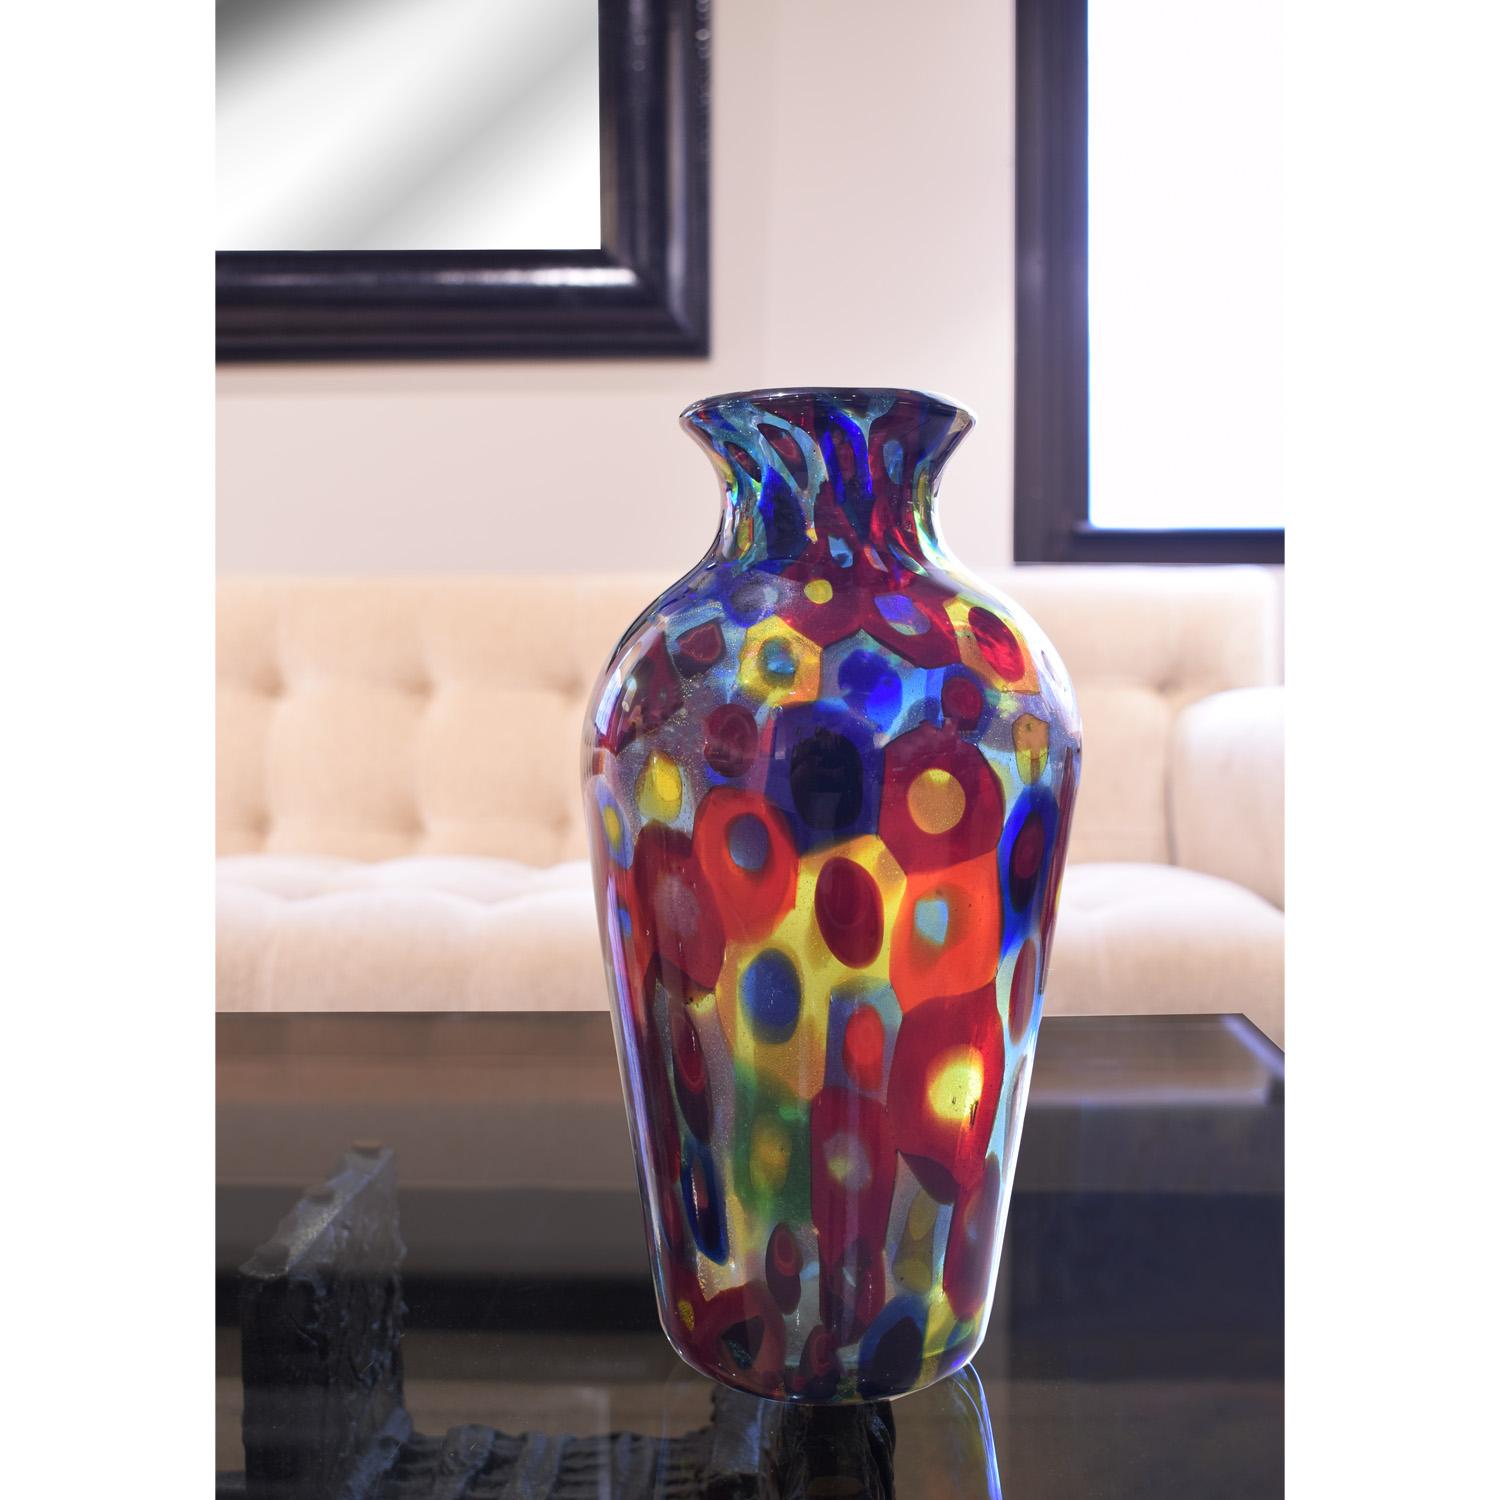 Mid-20th Century Handblown Glass Vase with Large Murrhines by Anzolo Fuga for A.V.E.M, 1950s For Sale